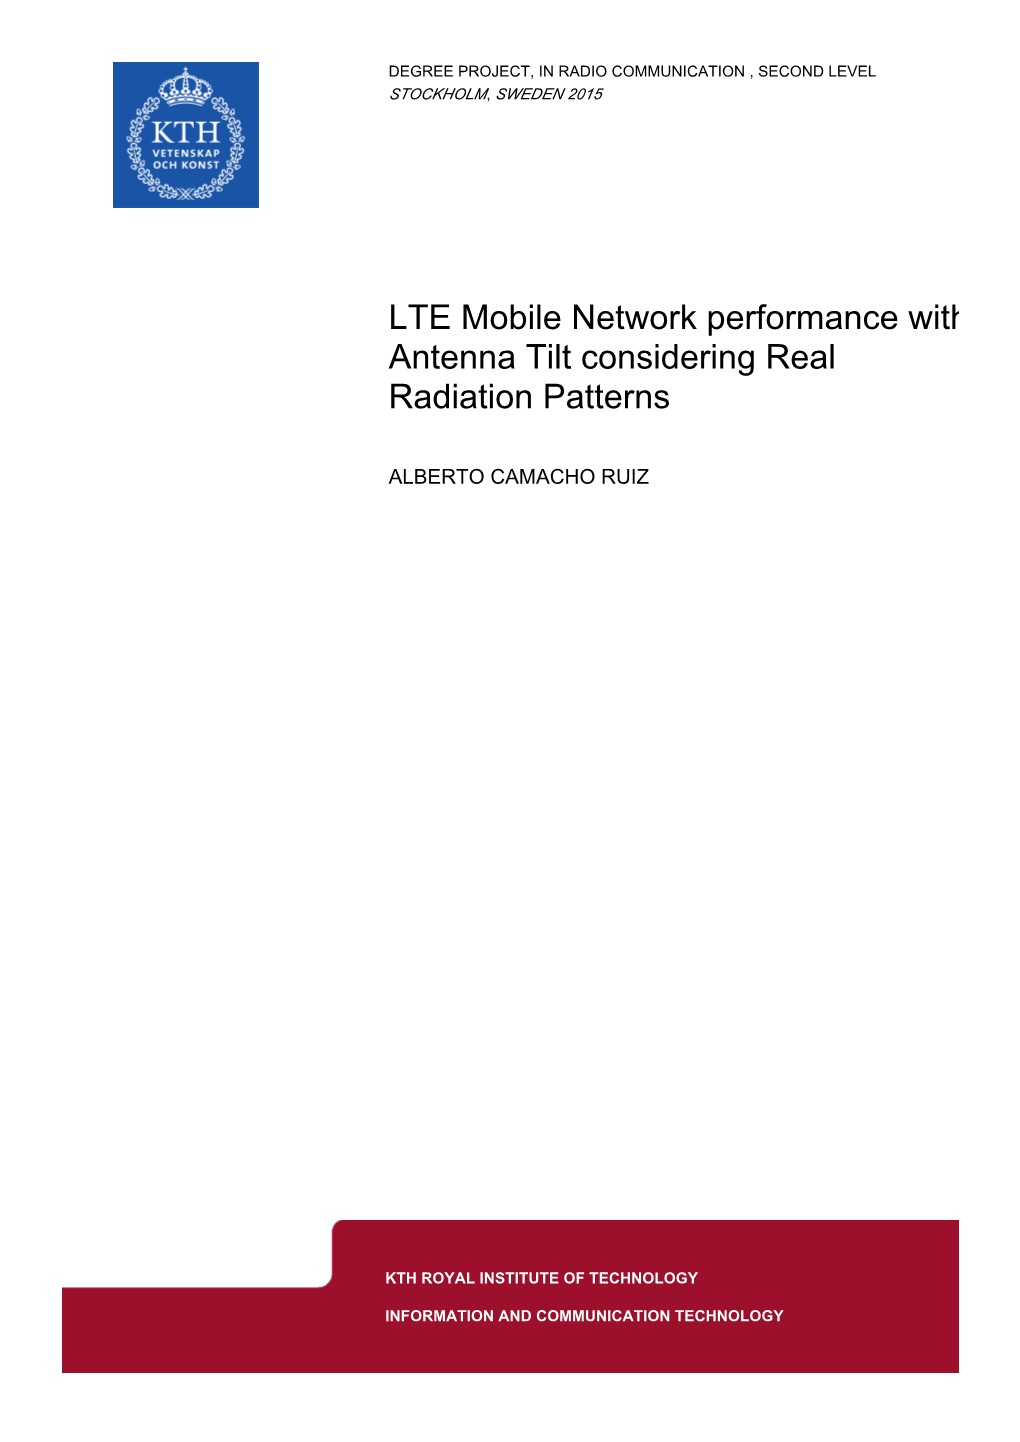 LTE Mobile Network Performance with Antenna Tilt Considering Real Radiation Patterns